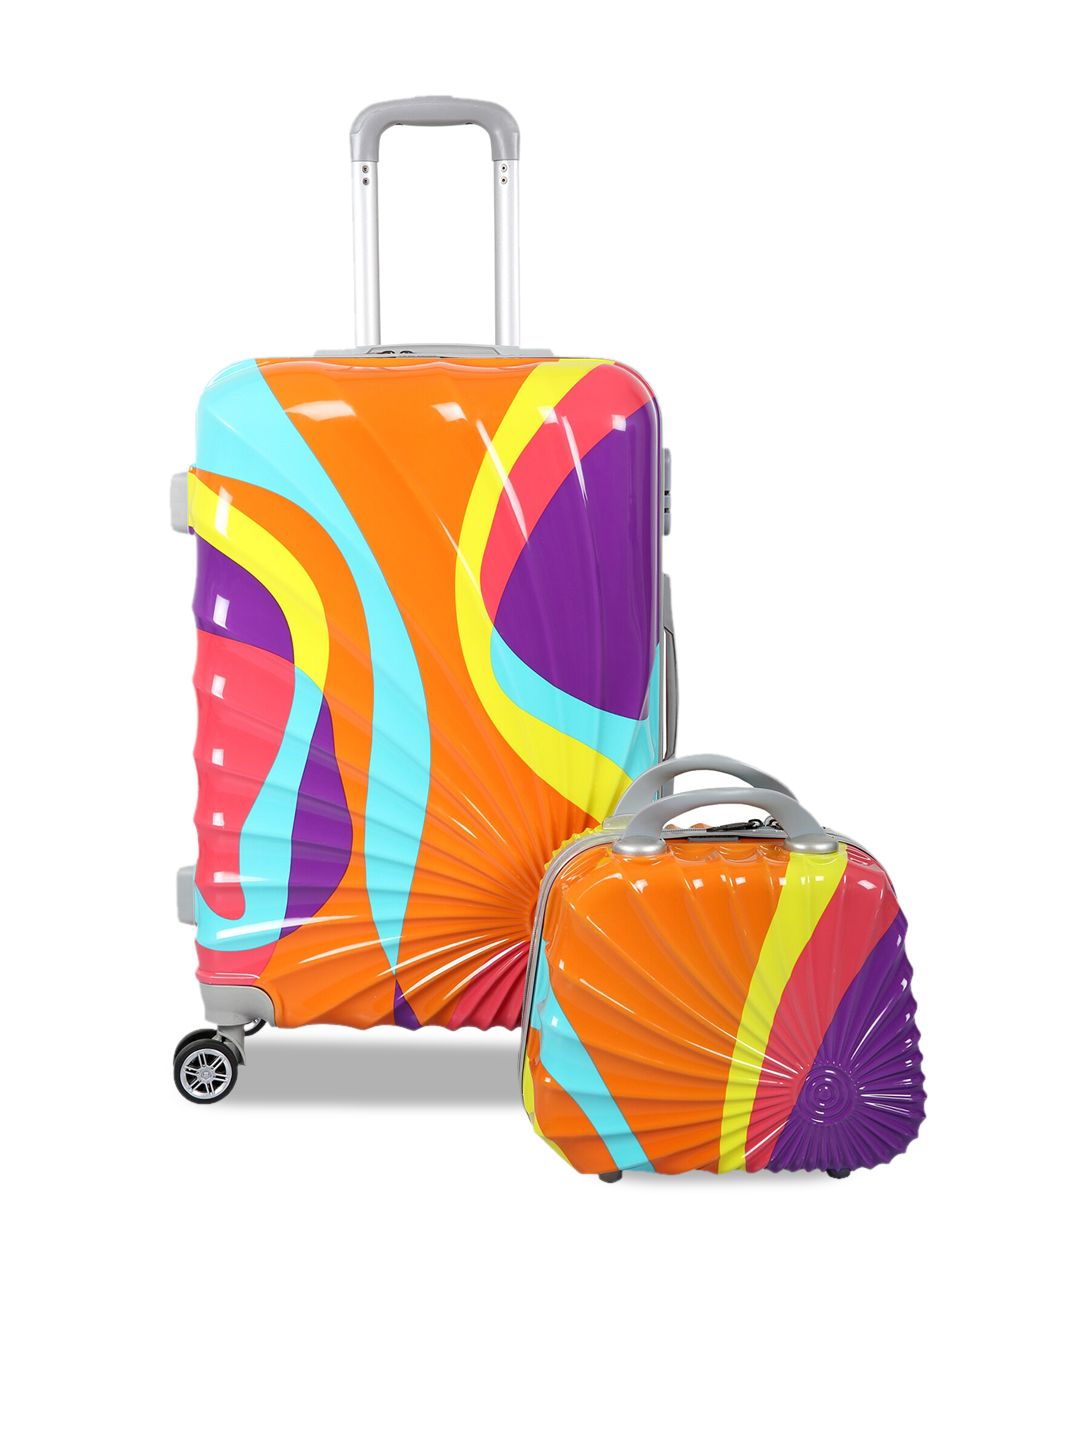 Polo Class Unisex Multicoloured Printed Travel Luggage Trolley Bag with Vanity Bag Price in India